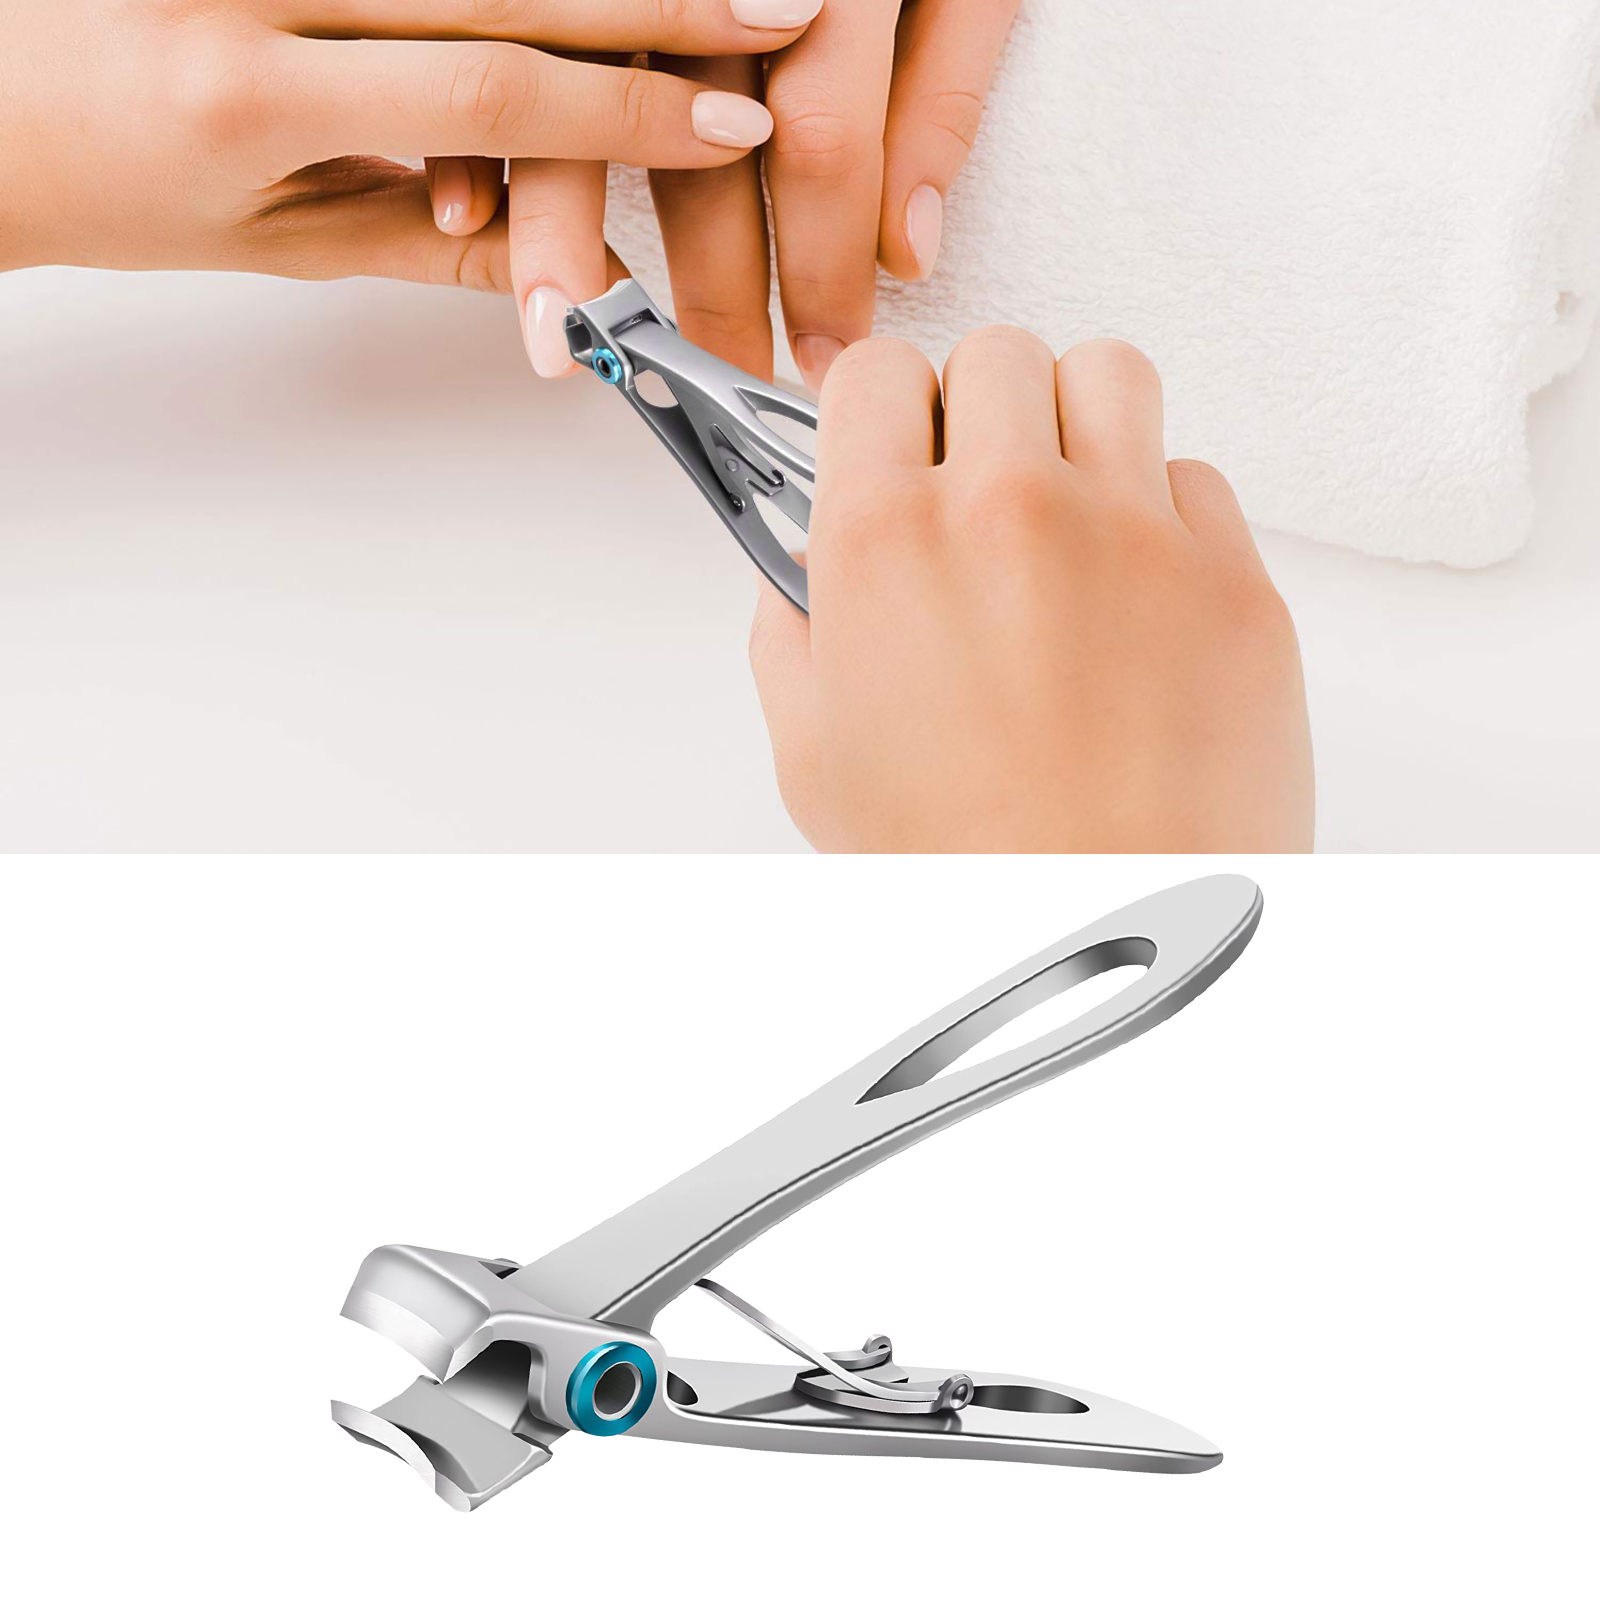 Nail Cutter, Large